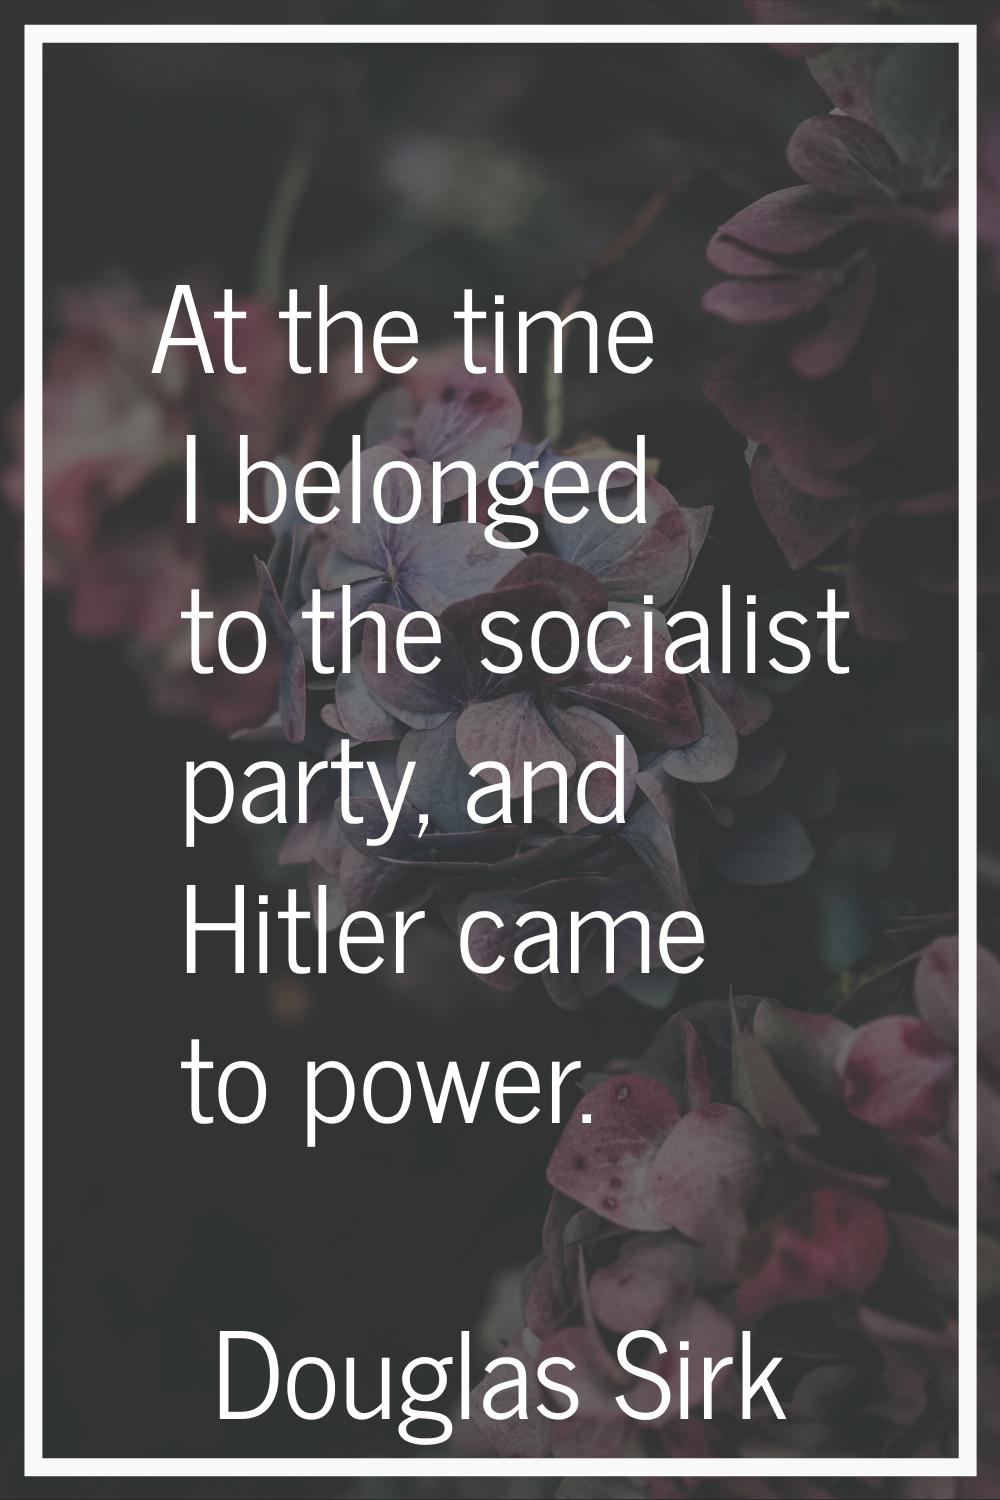 At the time I belonged to the socialist party, and Hitler came to power.